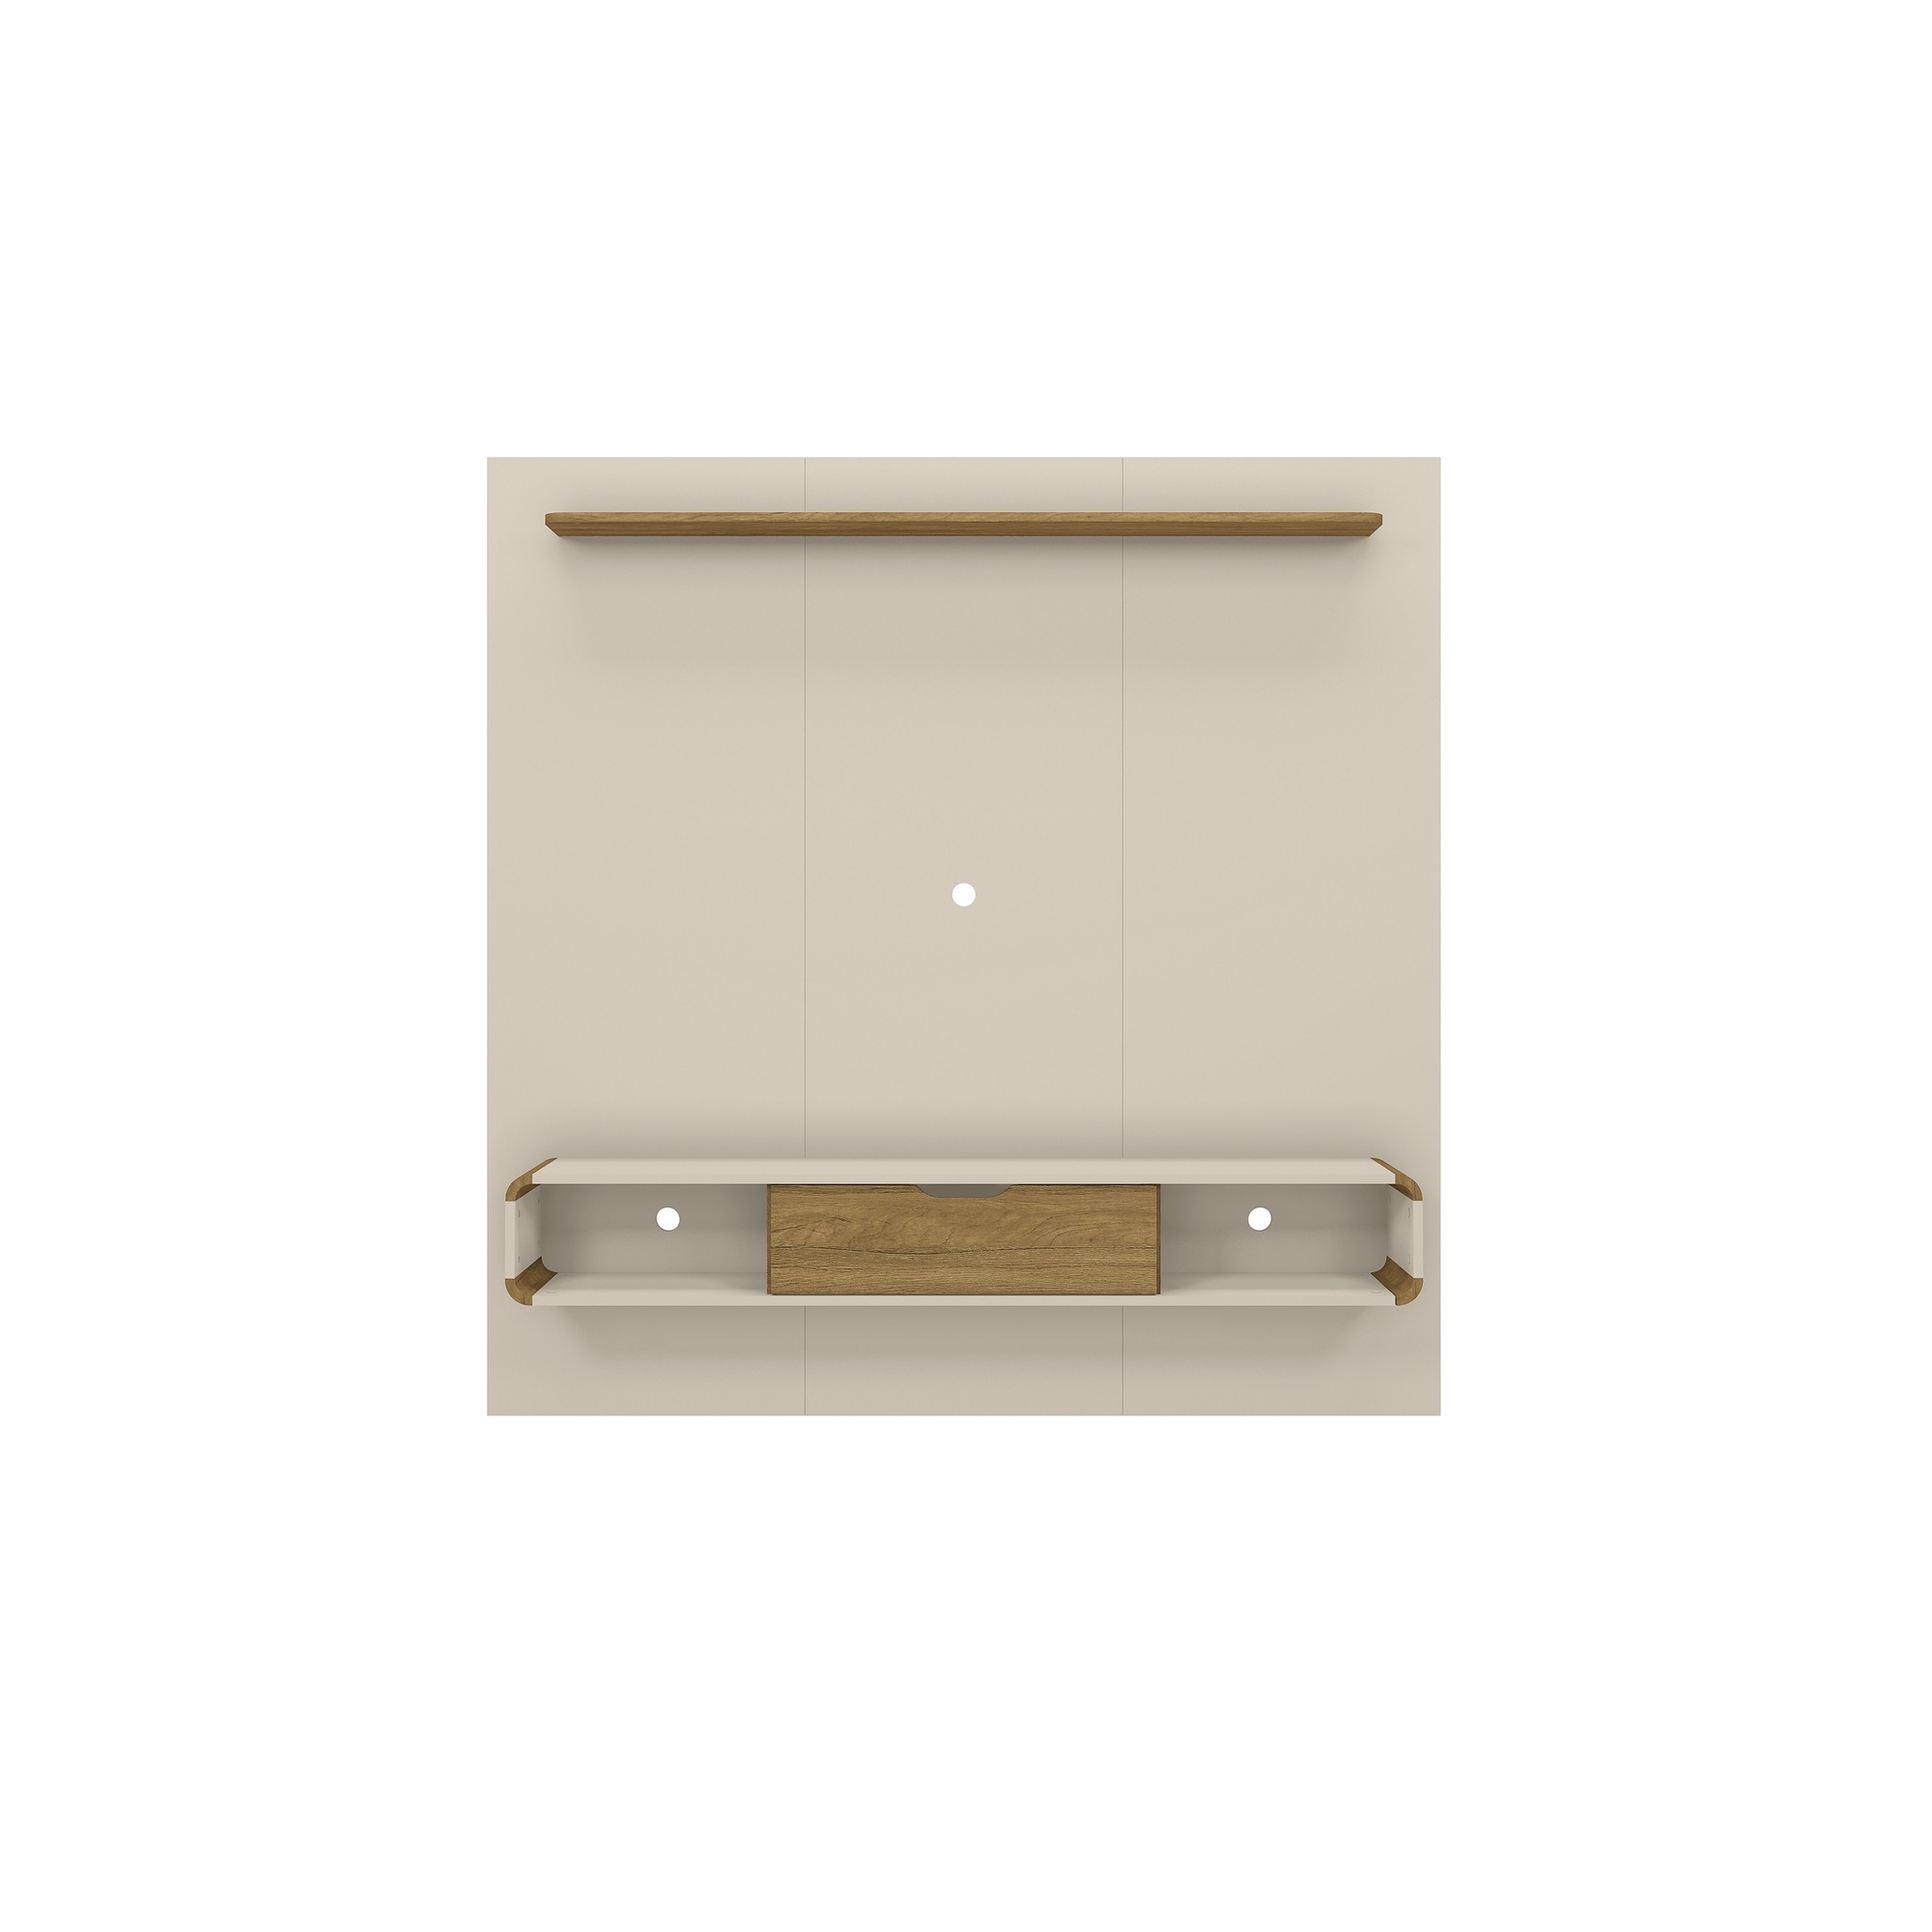 Manhattan Comfort, Camberly Floating Ent Cntr 3 Shelves Off White, Width 62.36 in, Height 63.19 in, Depth 11.65 in, Model 247BMC